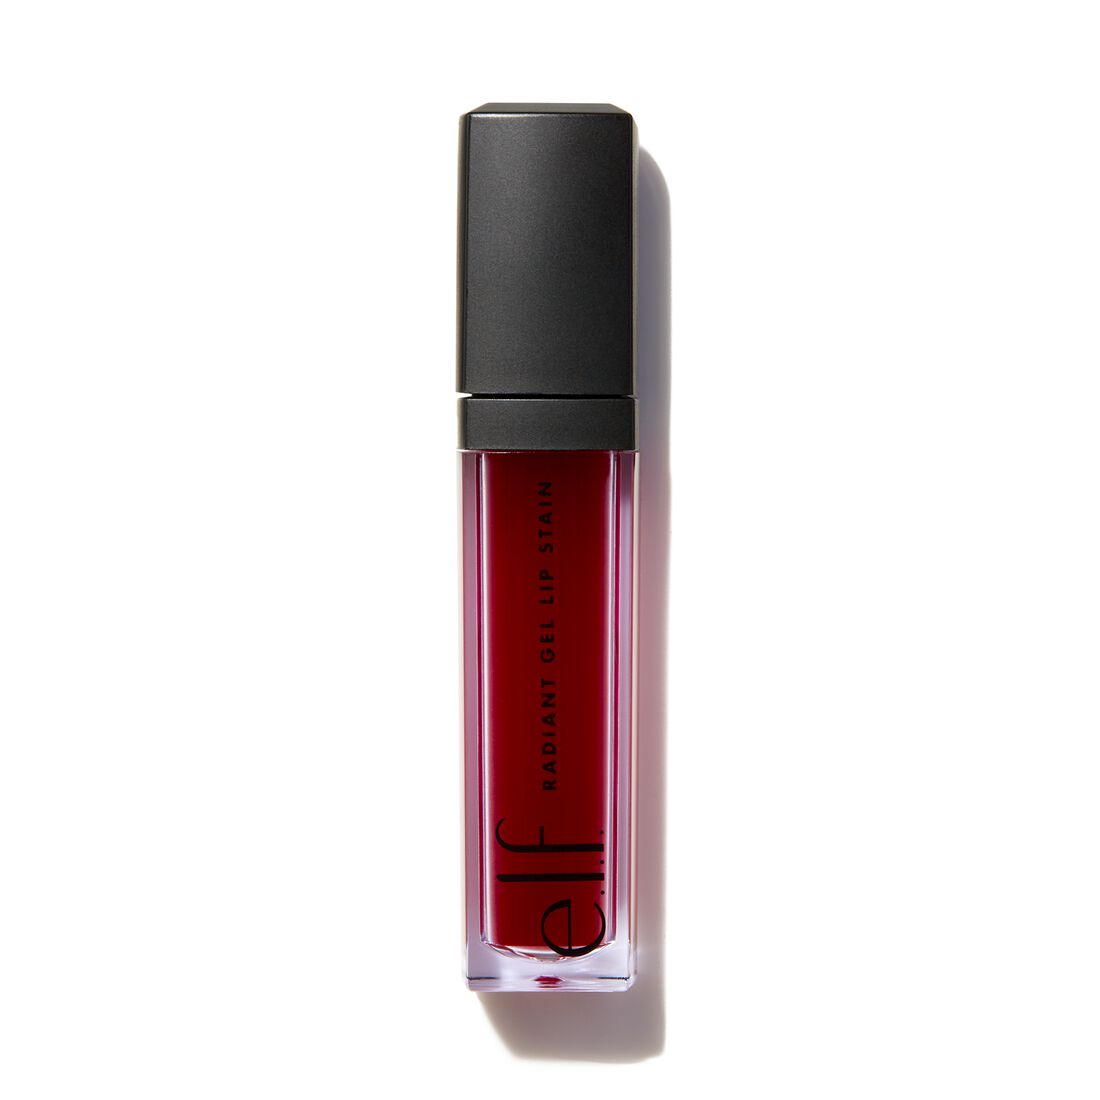 This long-wear lip color stains the lips for that "just bitten" e...